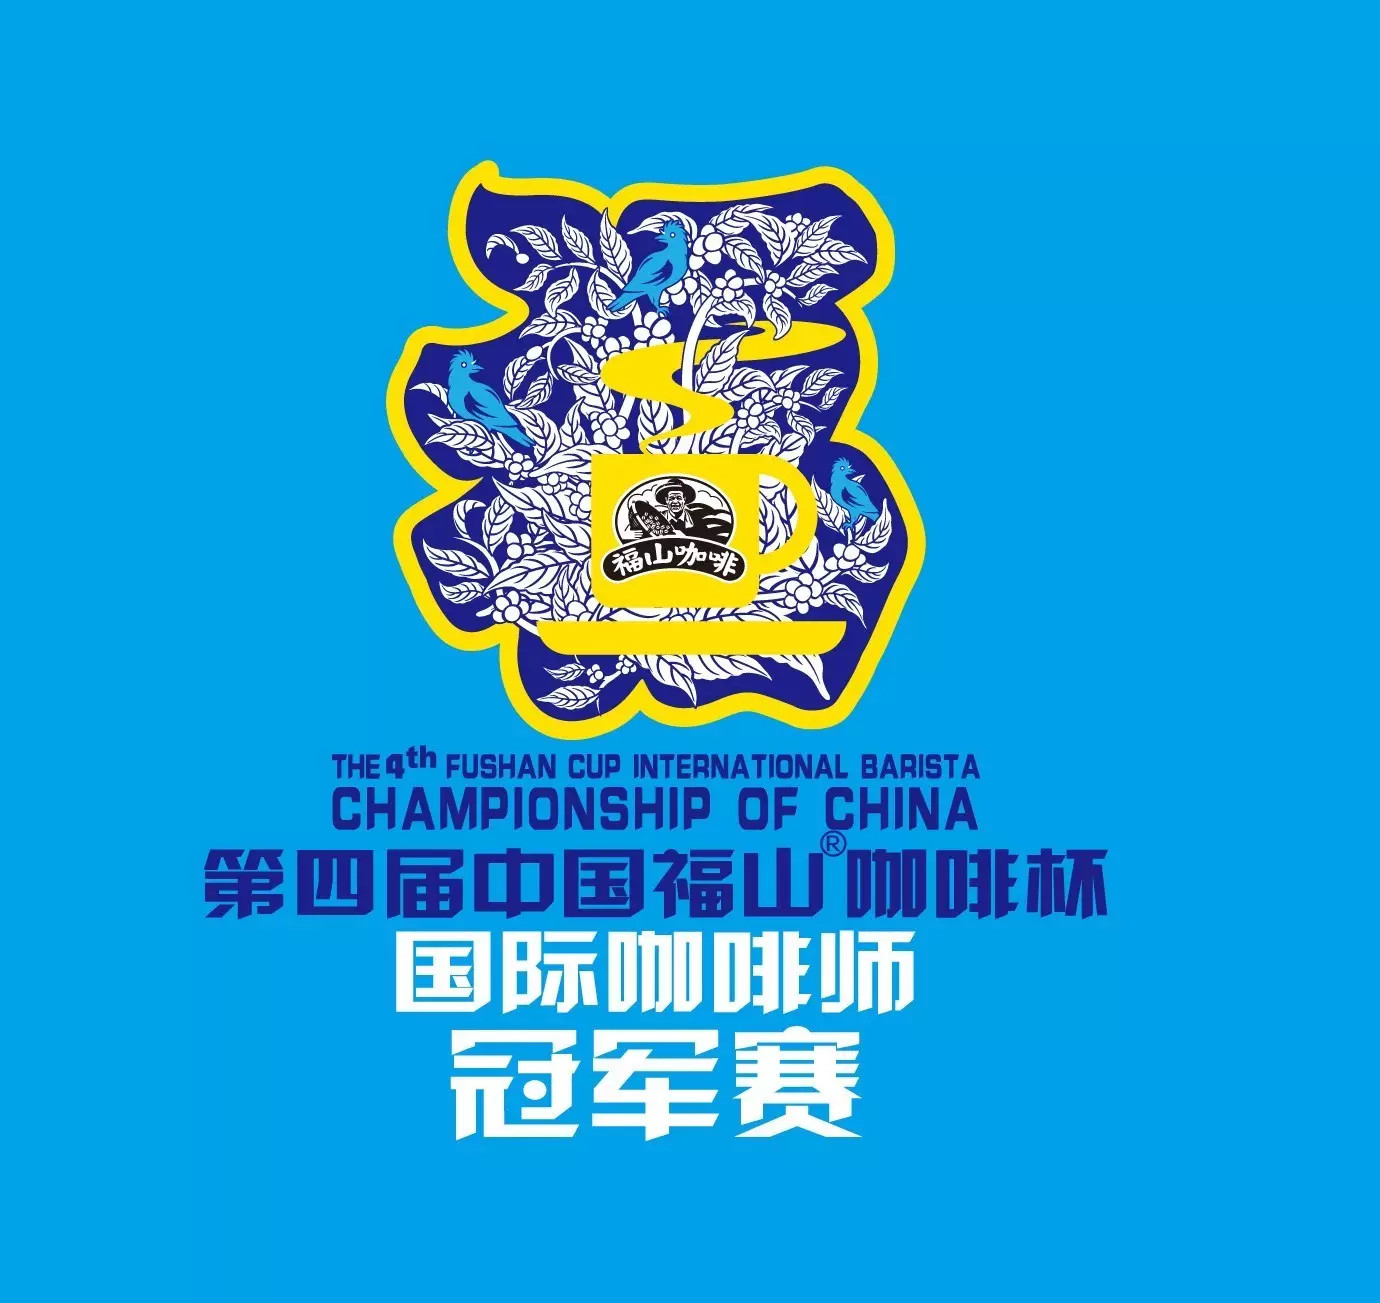 The 4th China Fushan Cup International barista Championship will kick off on the 17th.